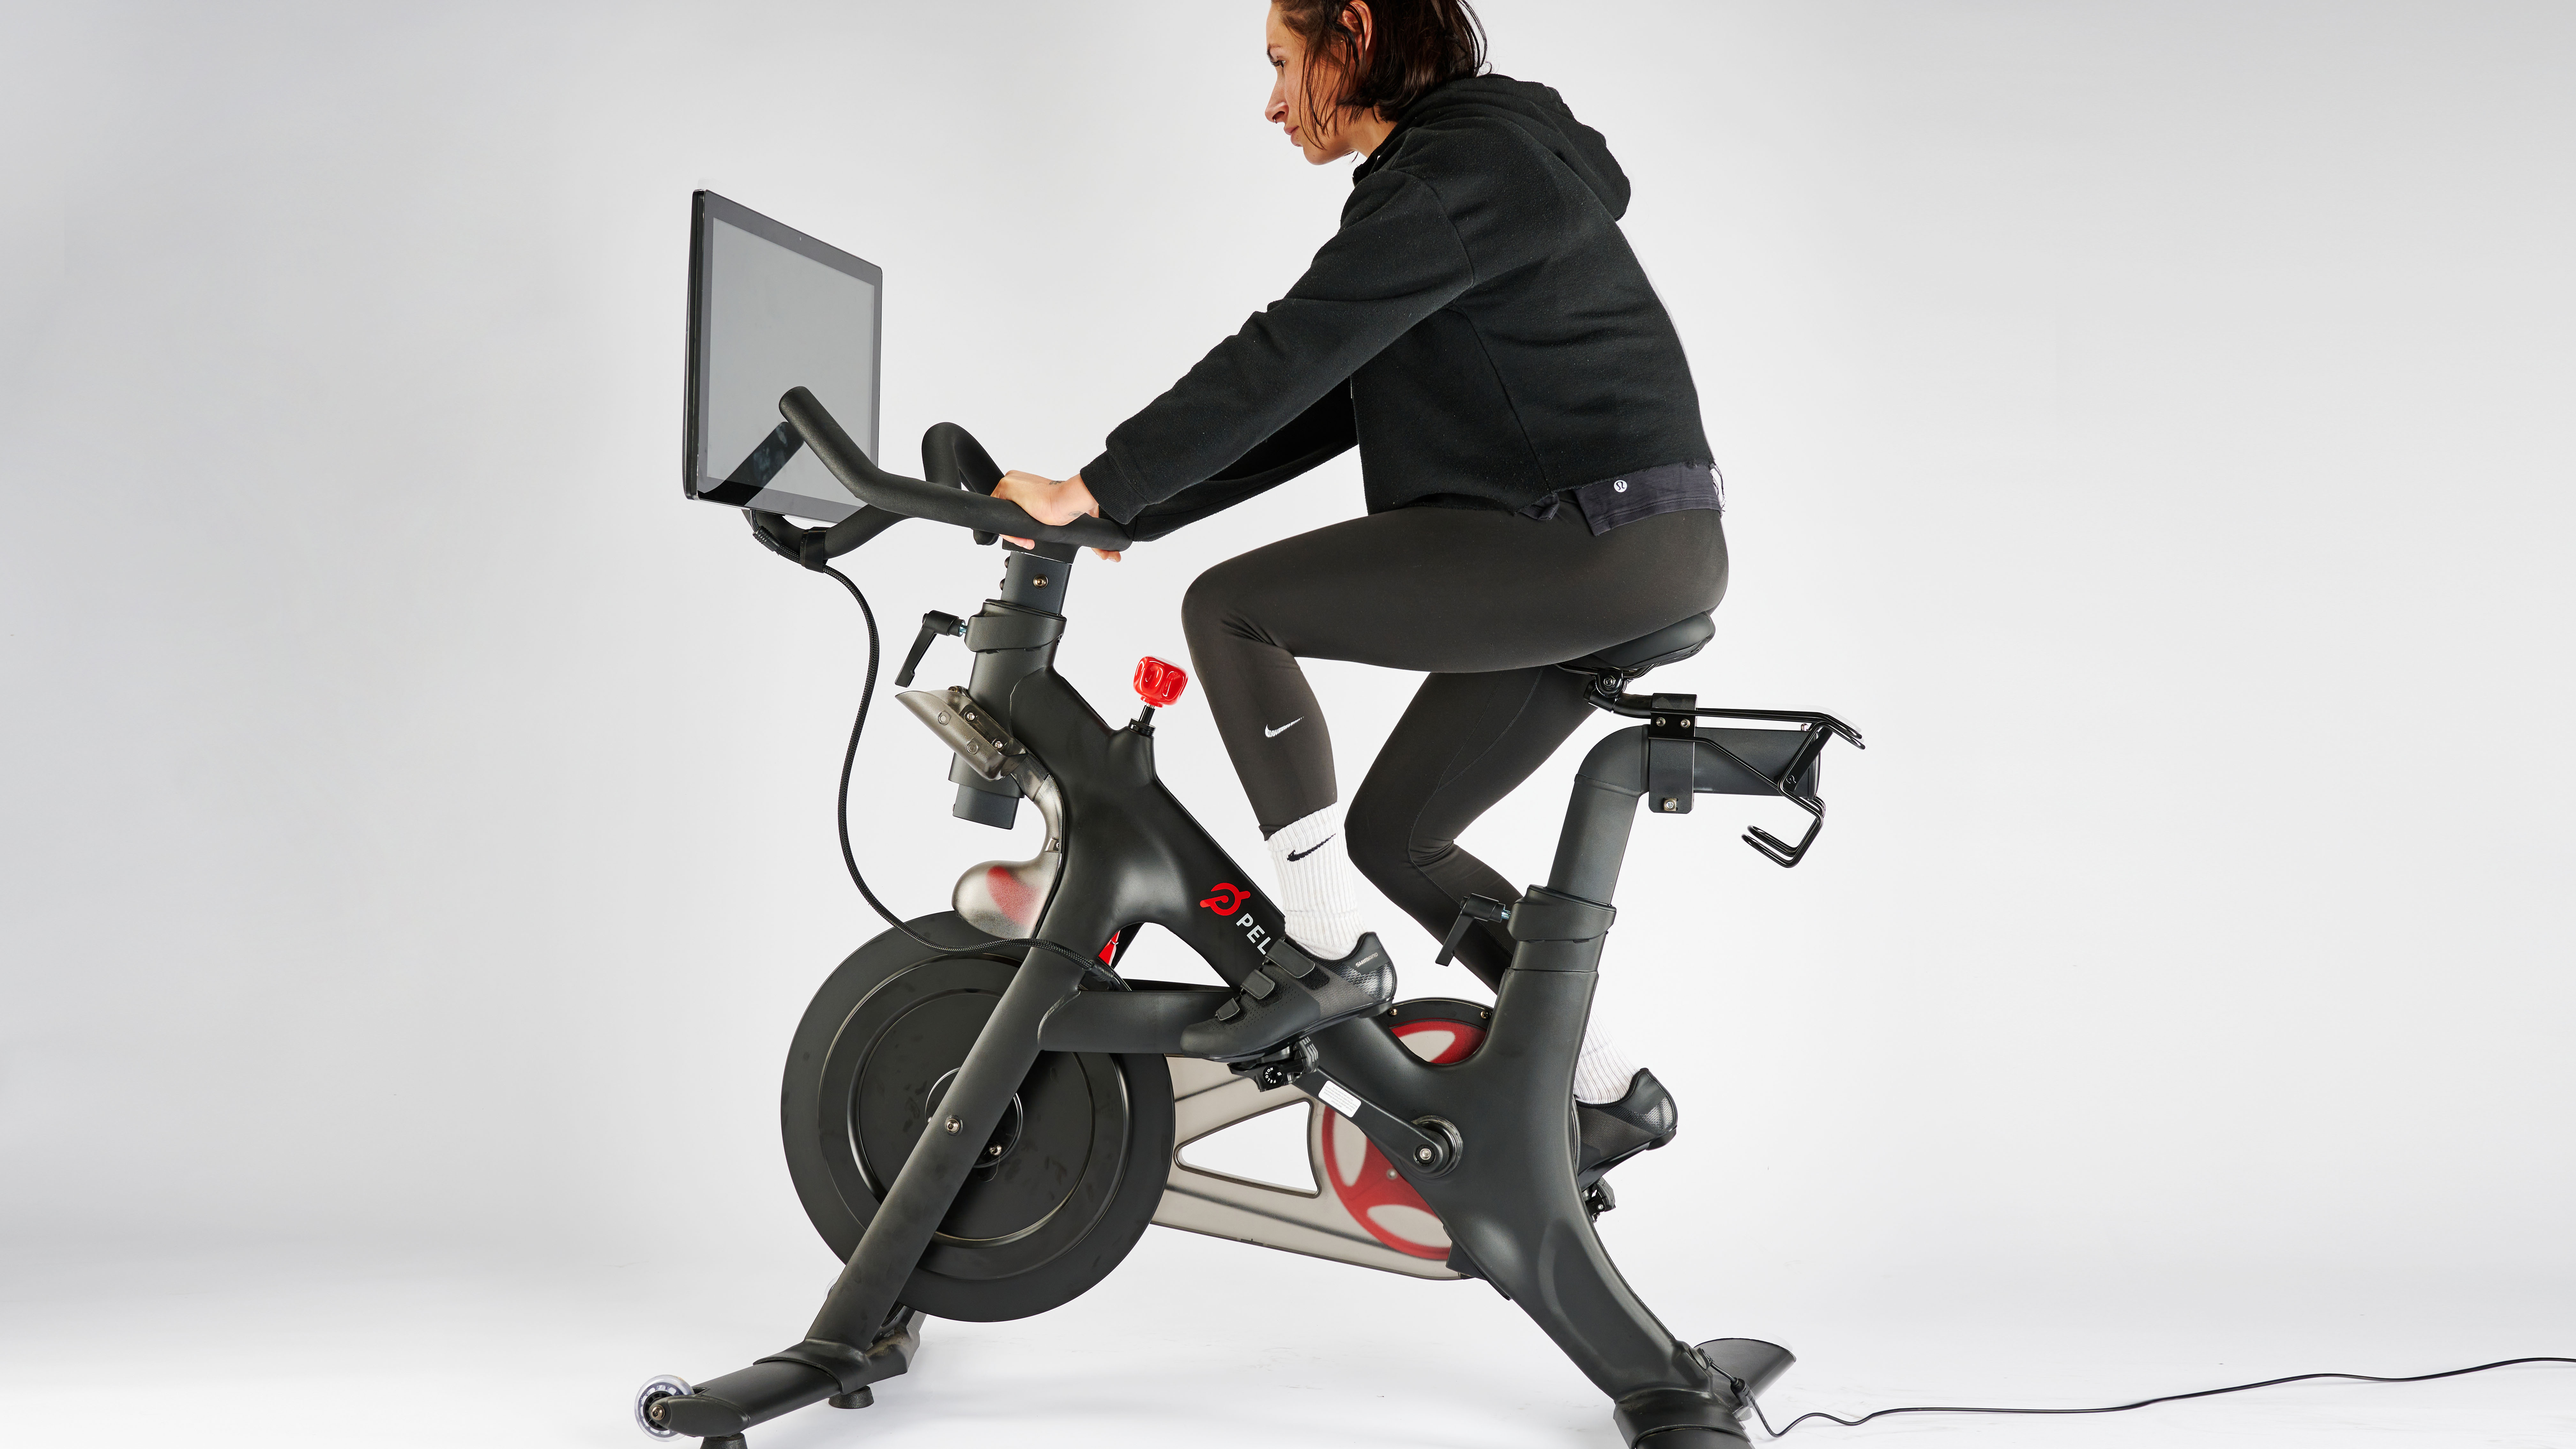 Peloton bike being tested by Sam Hopes, resident fitness writer at Live Science